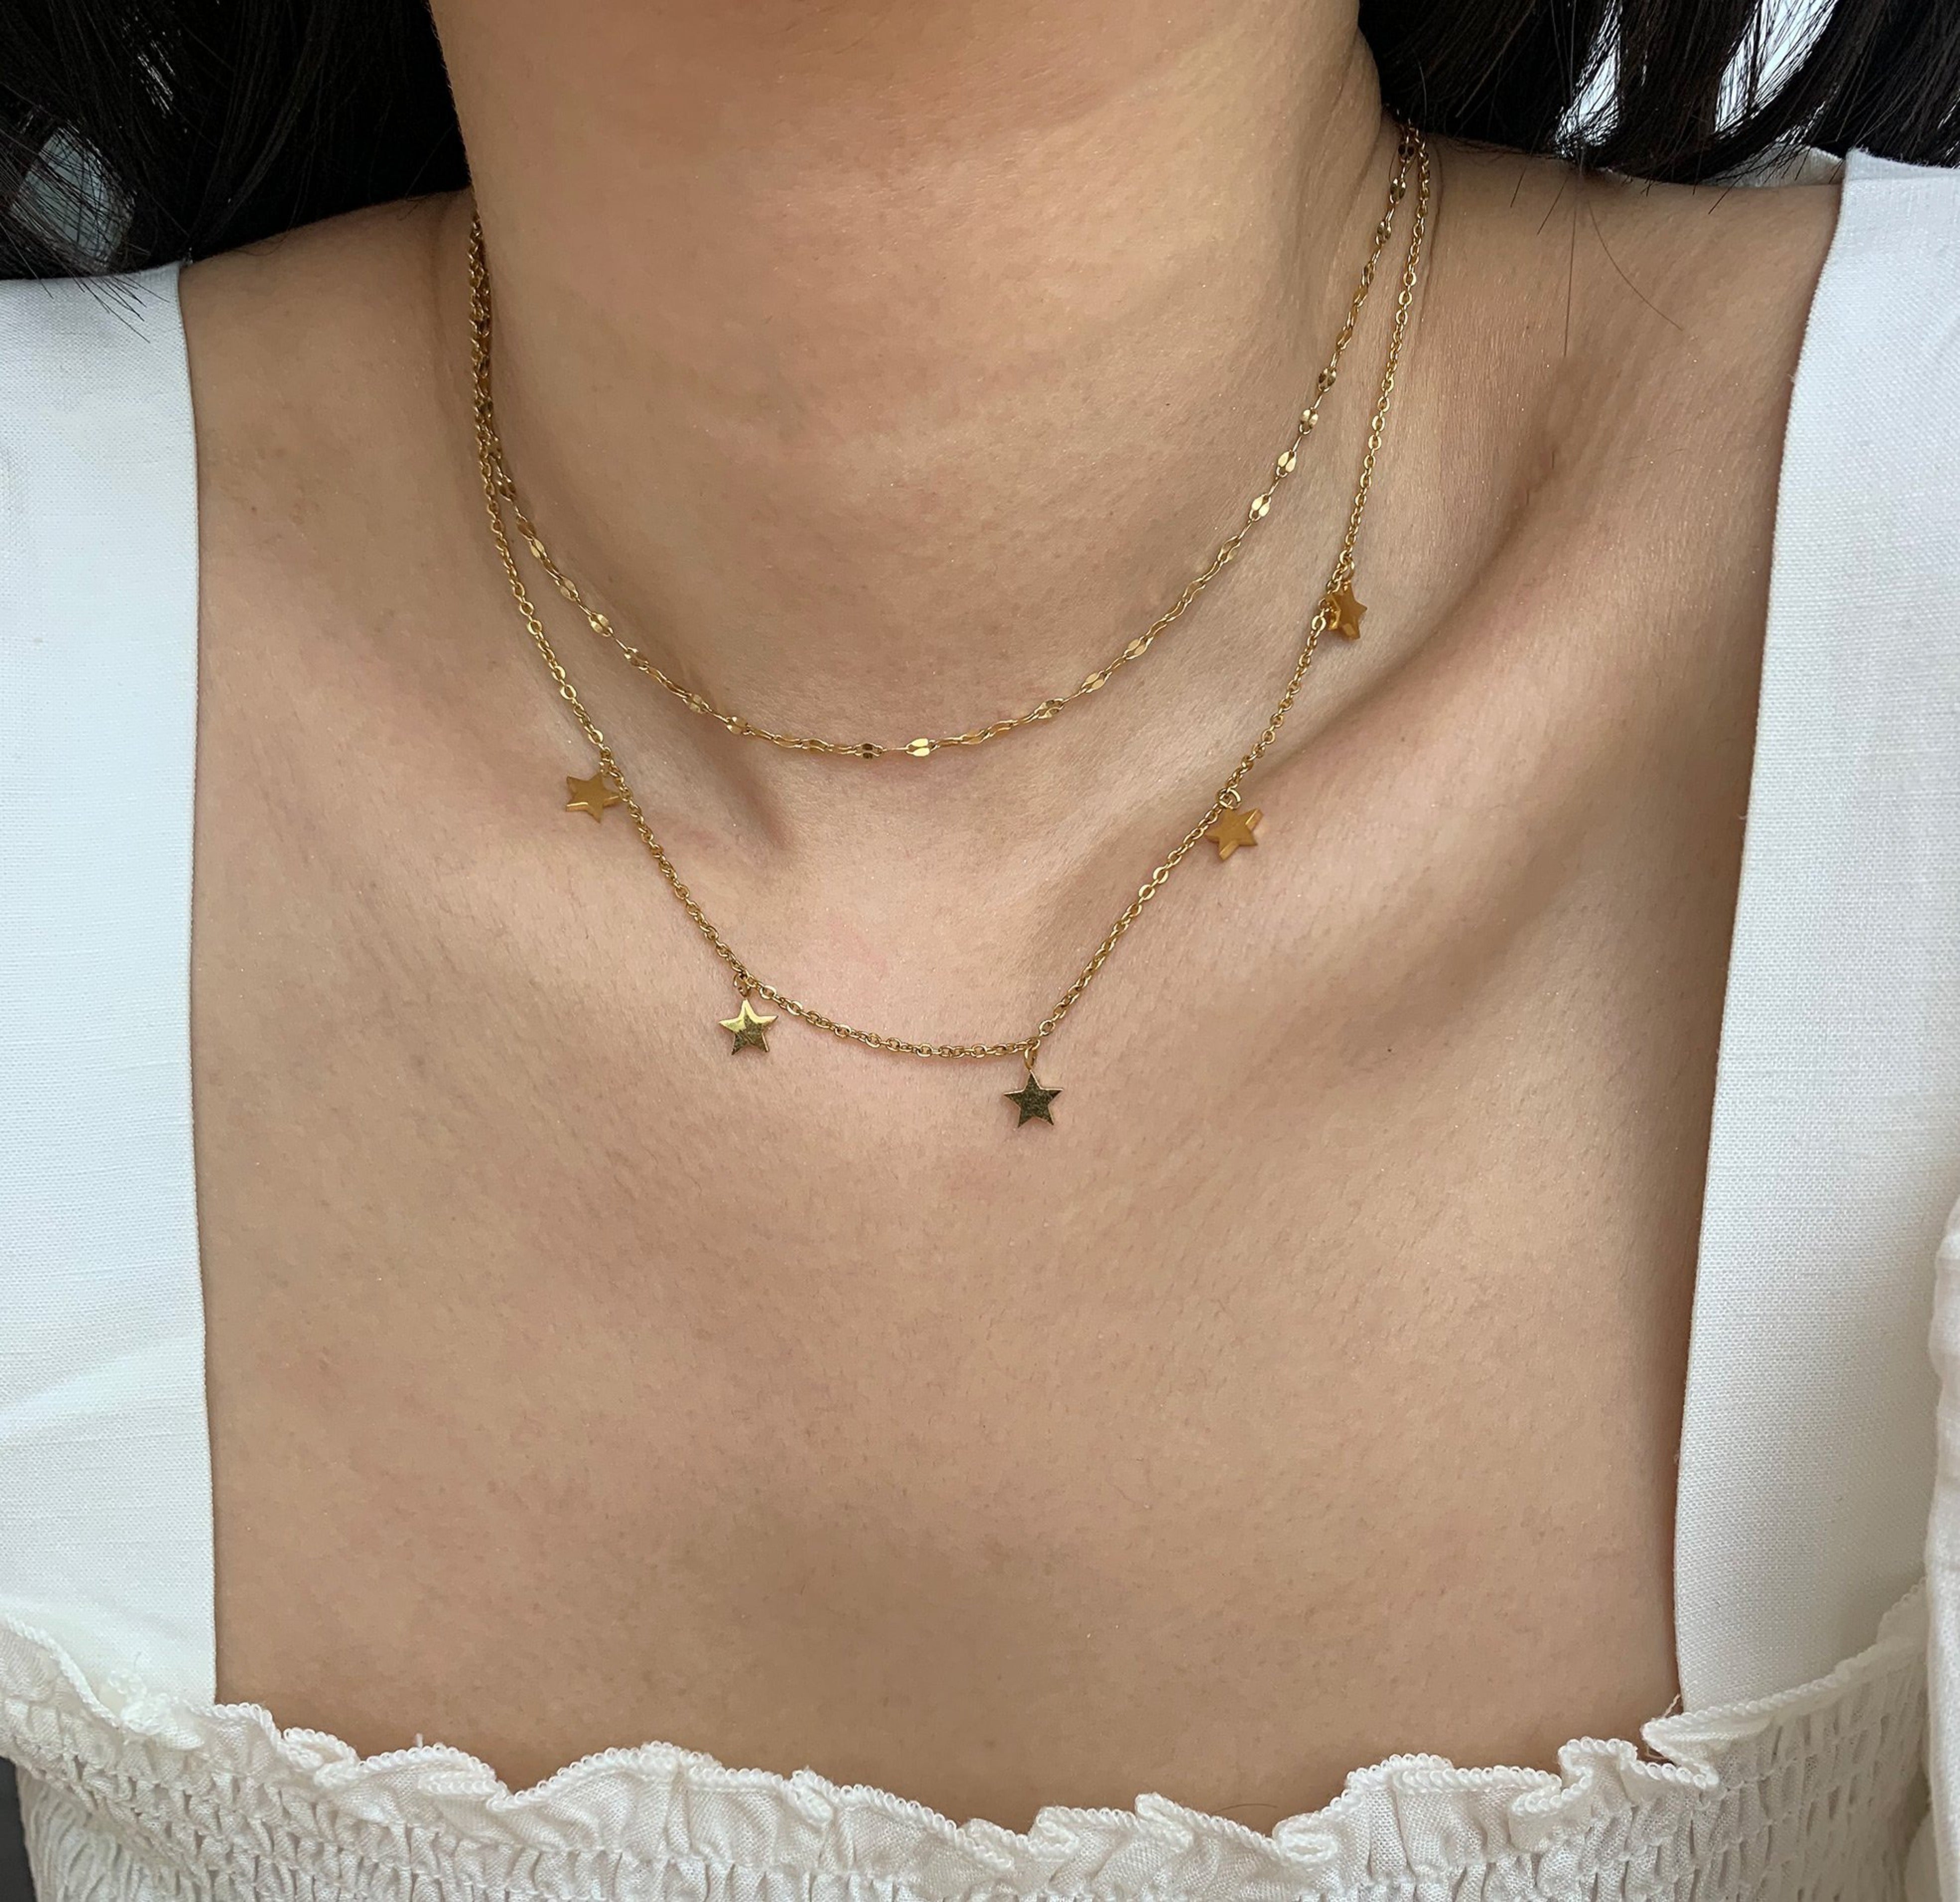 ELSIE GOLD DAINTY LACE CHAIN NECKLACE - SAMPLE